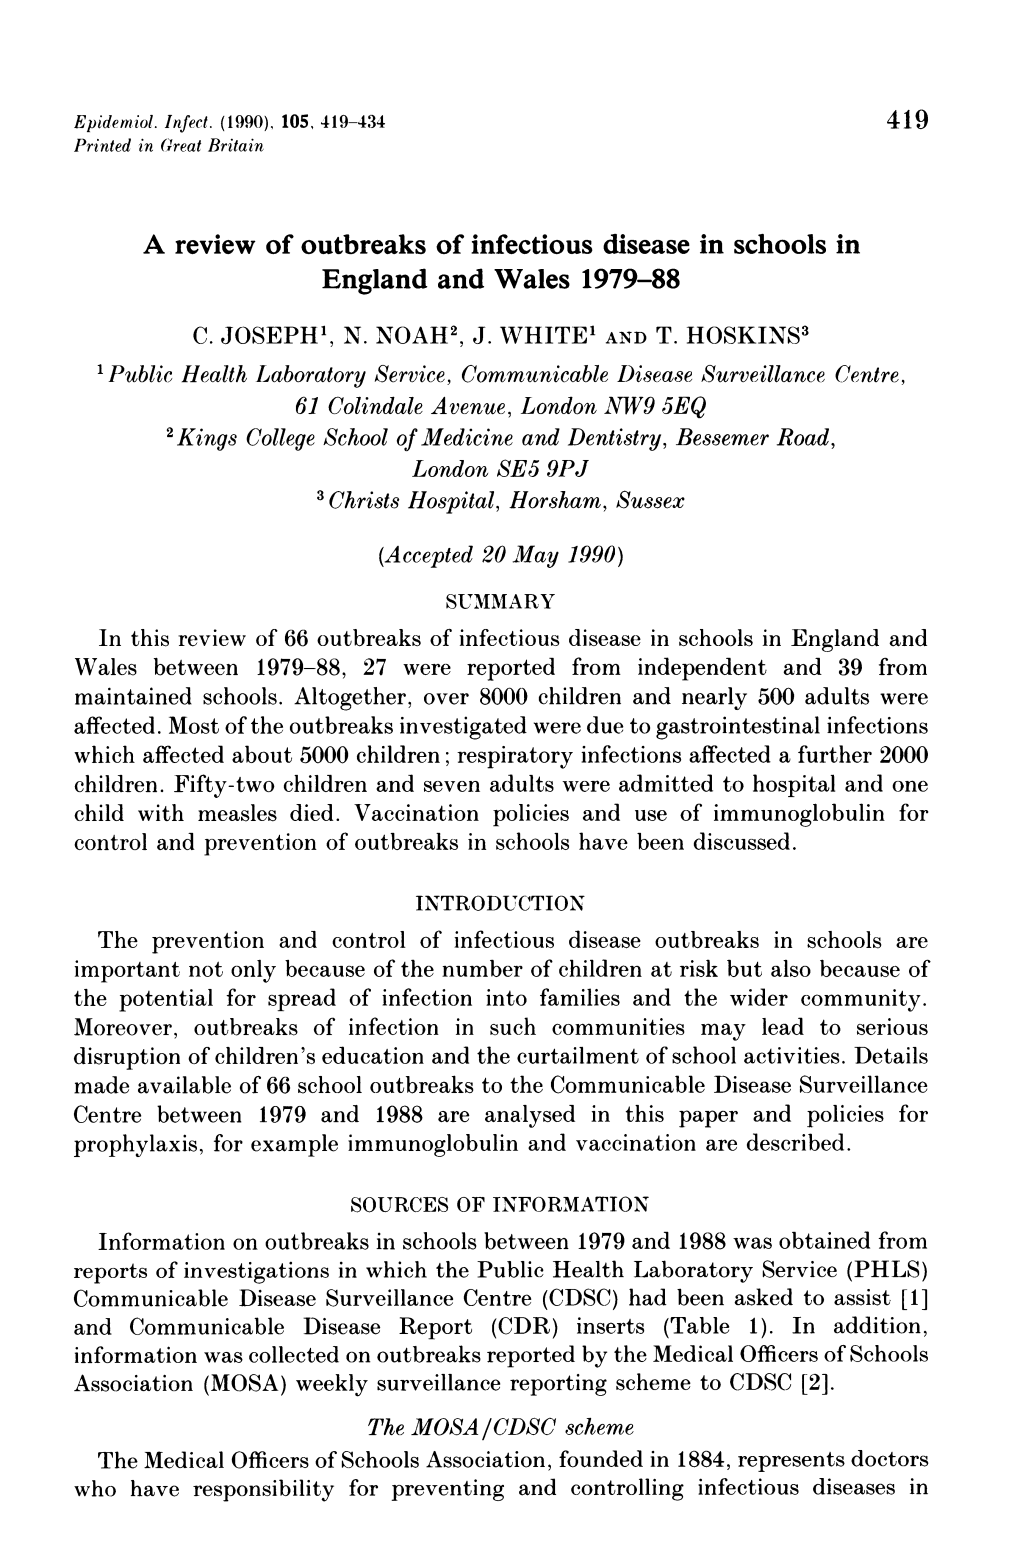 A Review of Outbreaks of Infectious Disease in Schools in England and Wales 1979-88 C